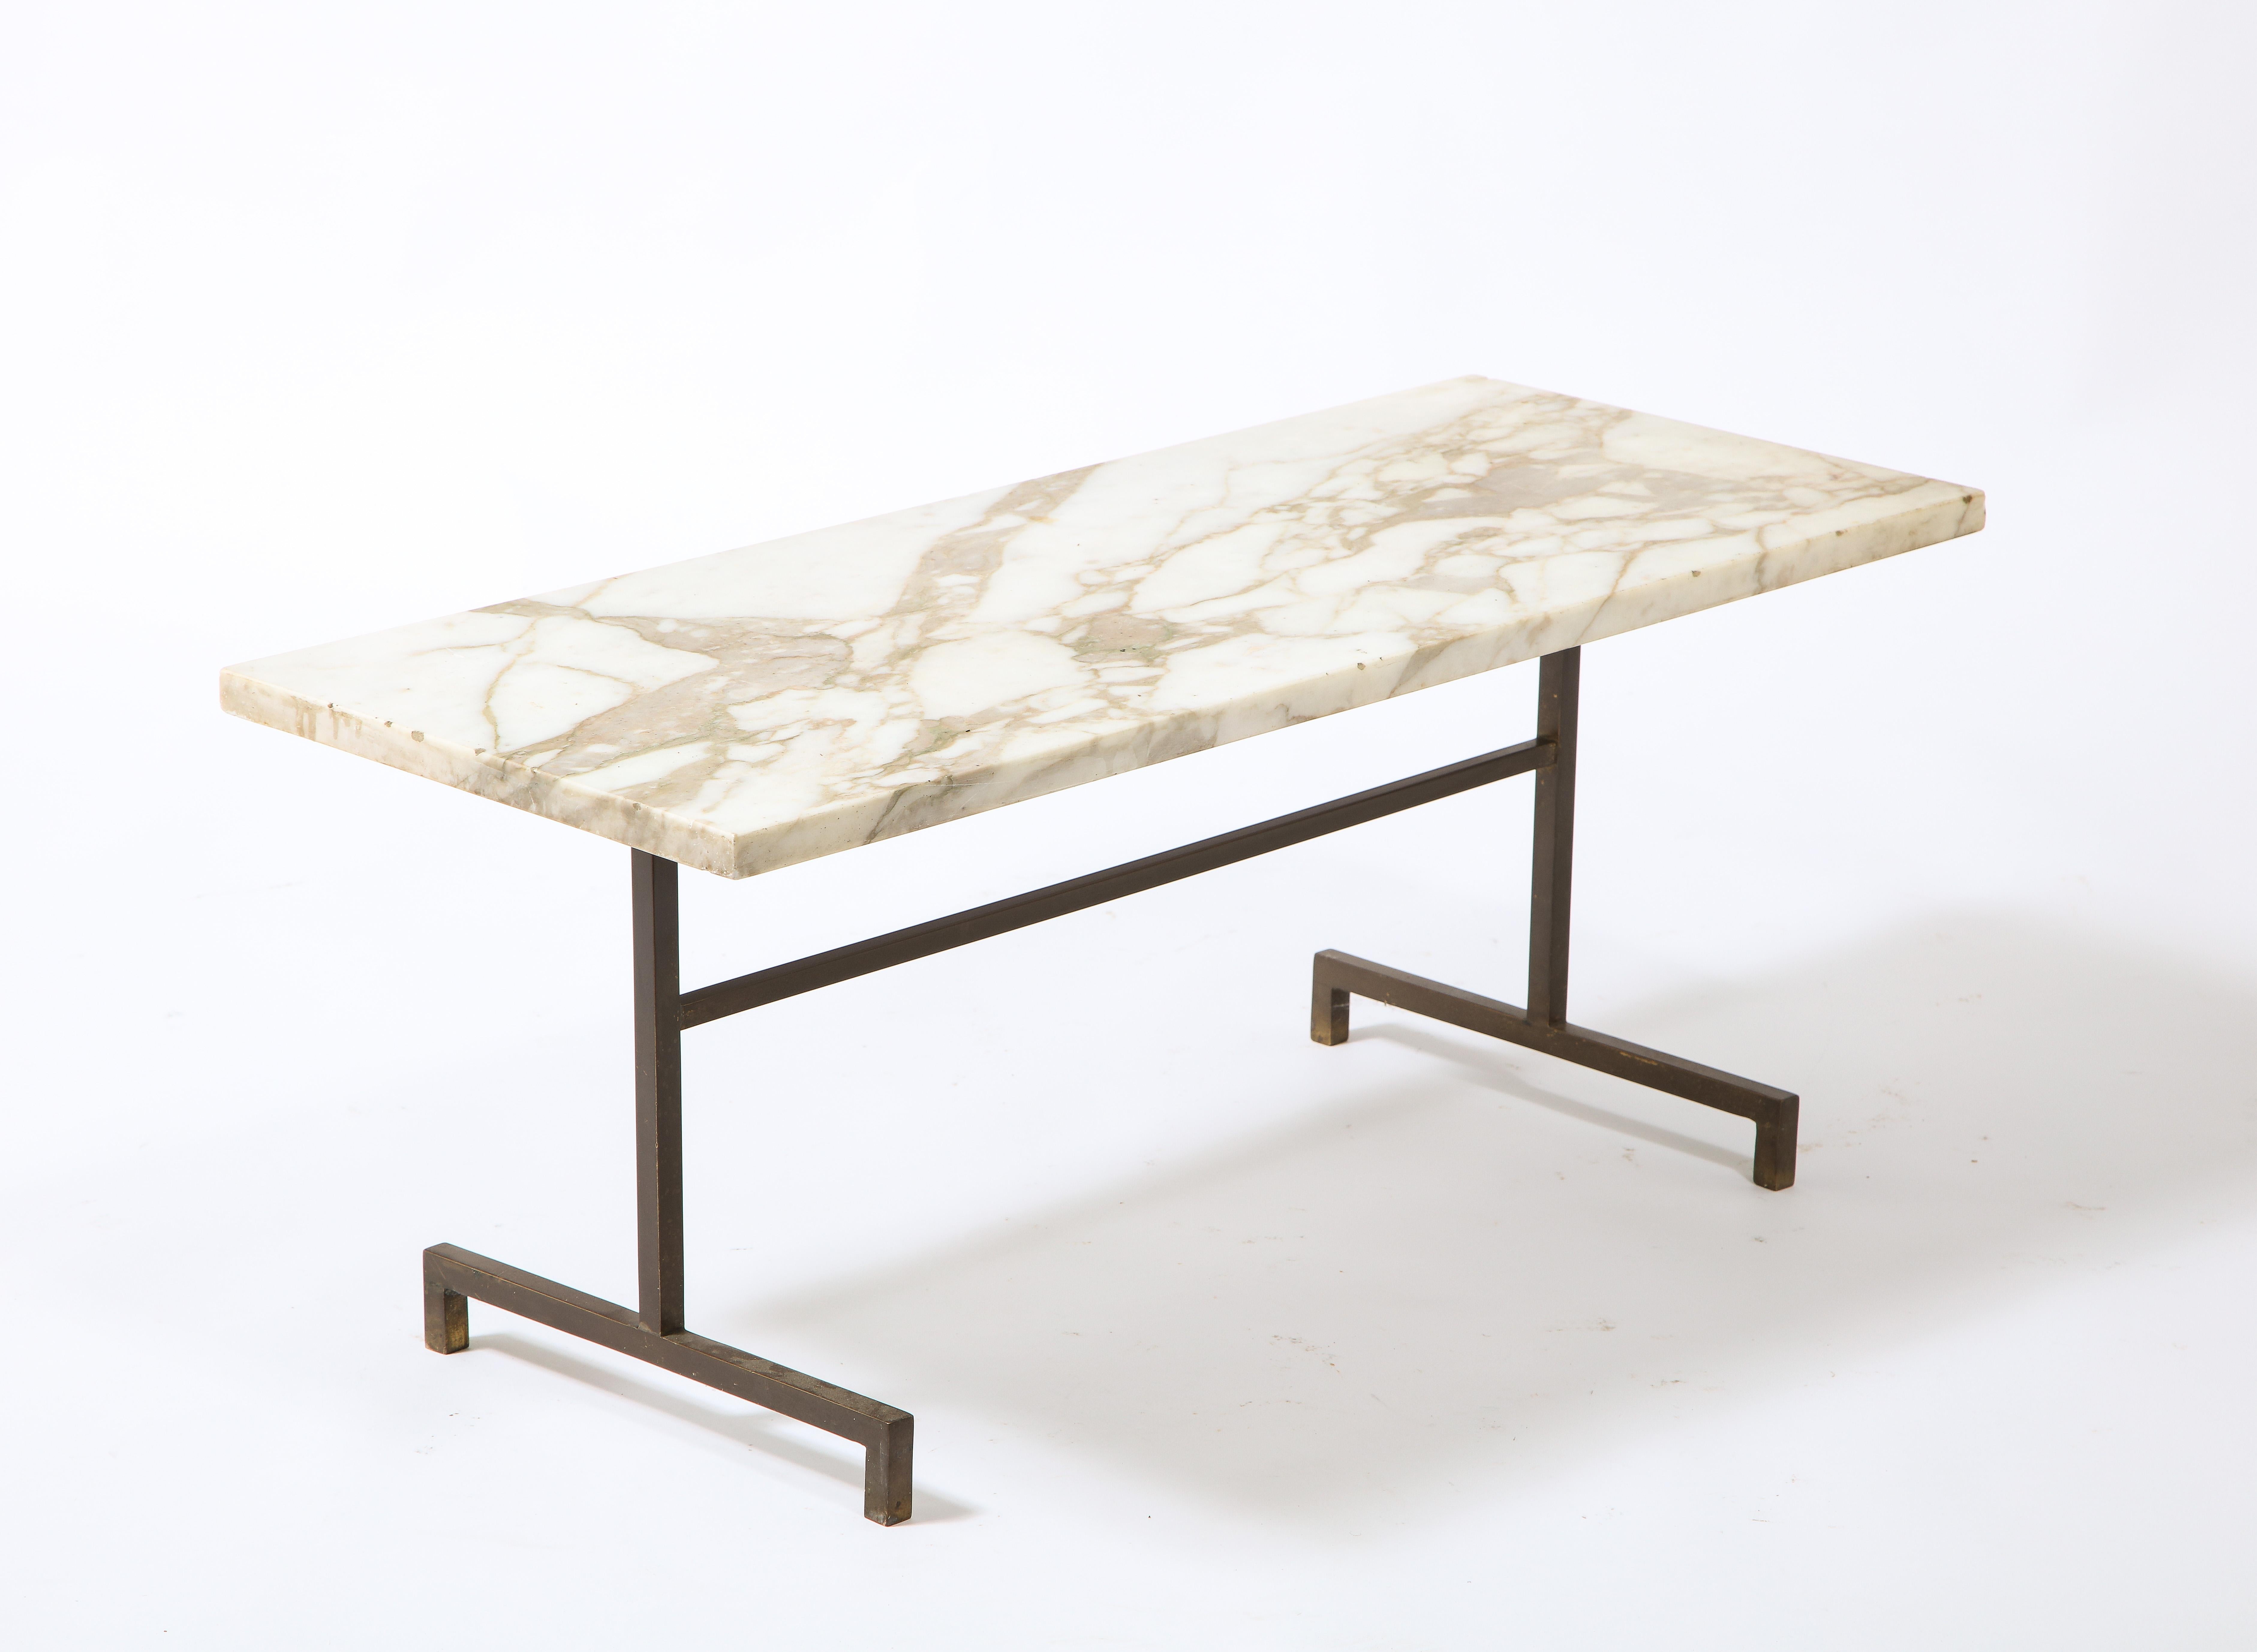 Simple Modernist Duplantier Style Marble & Brass End Table, France 1950's For Sale 1